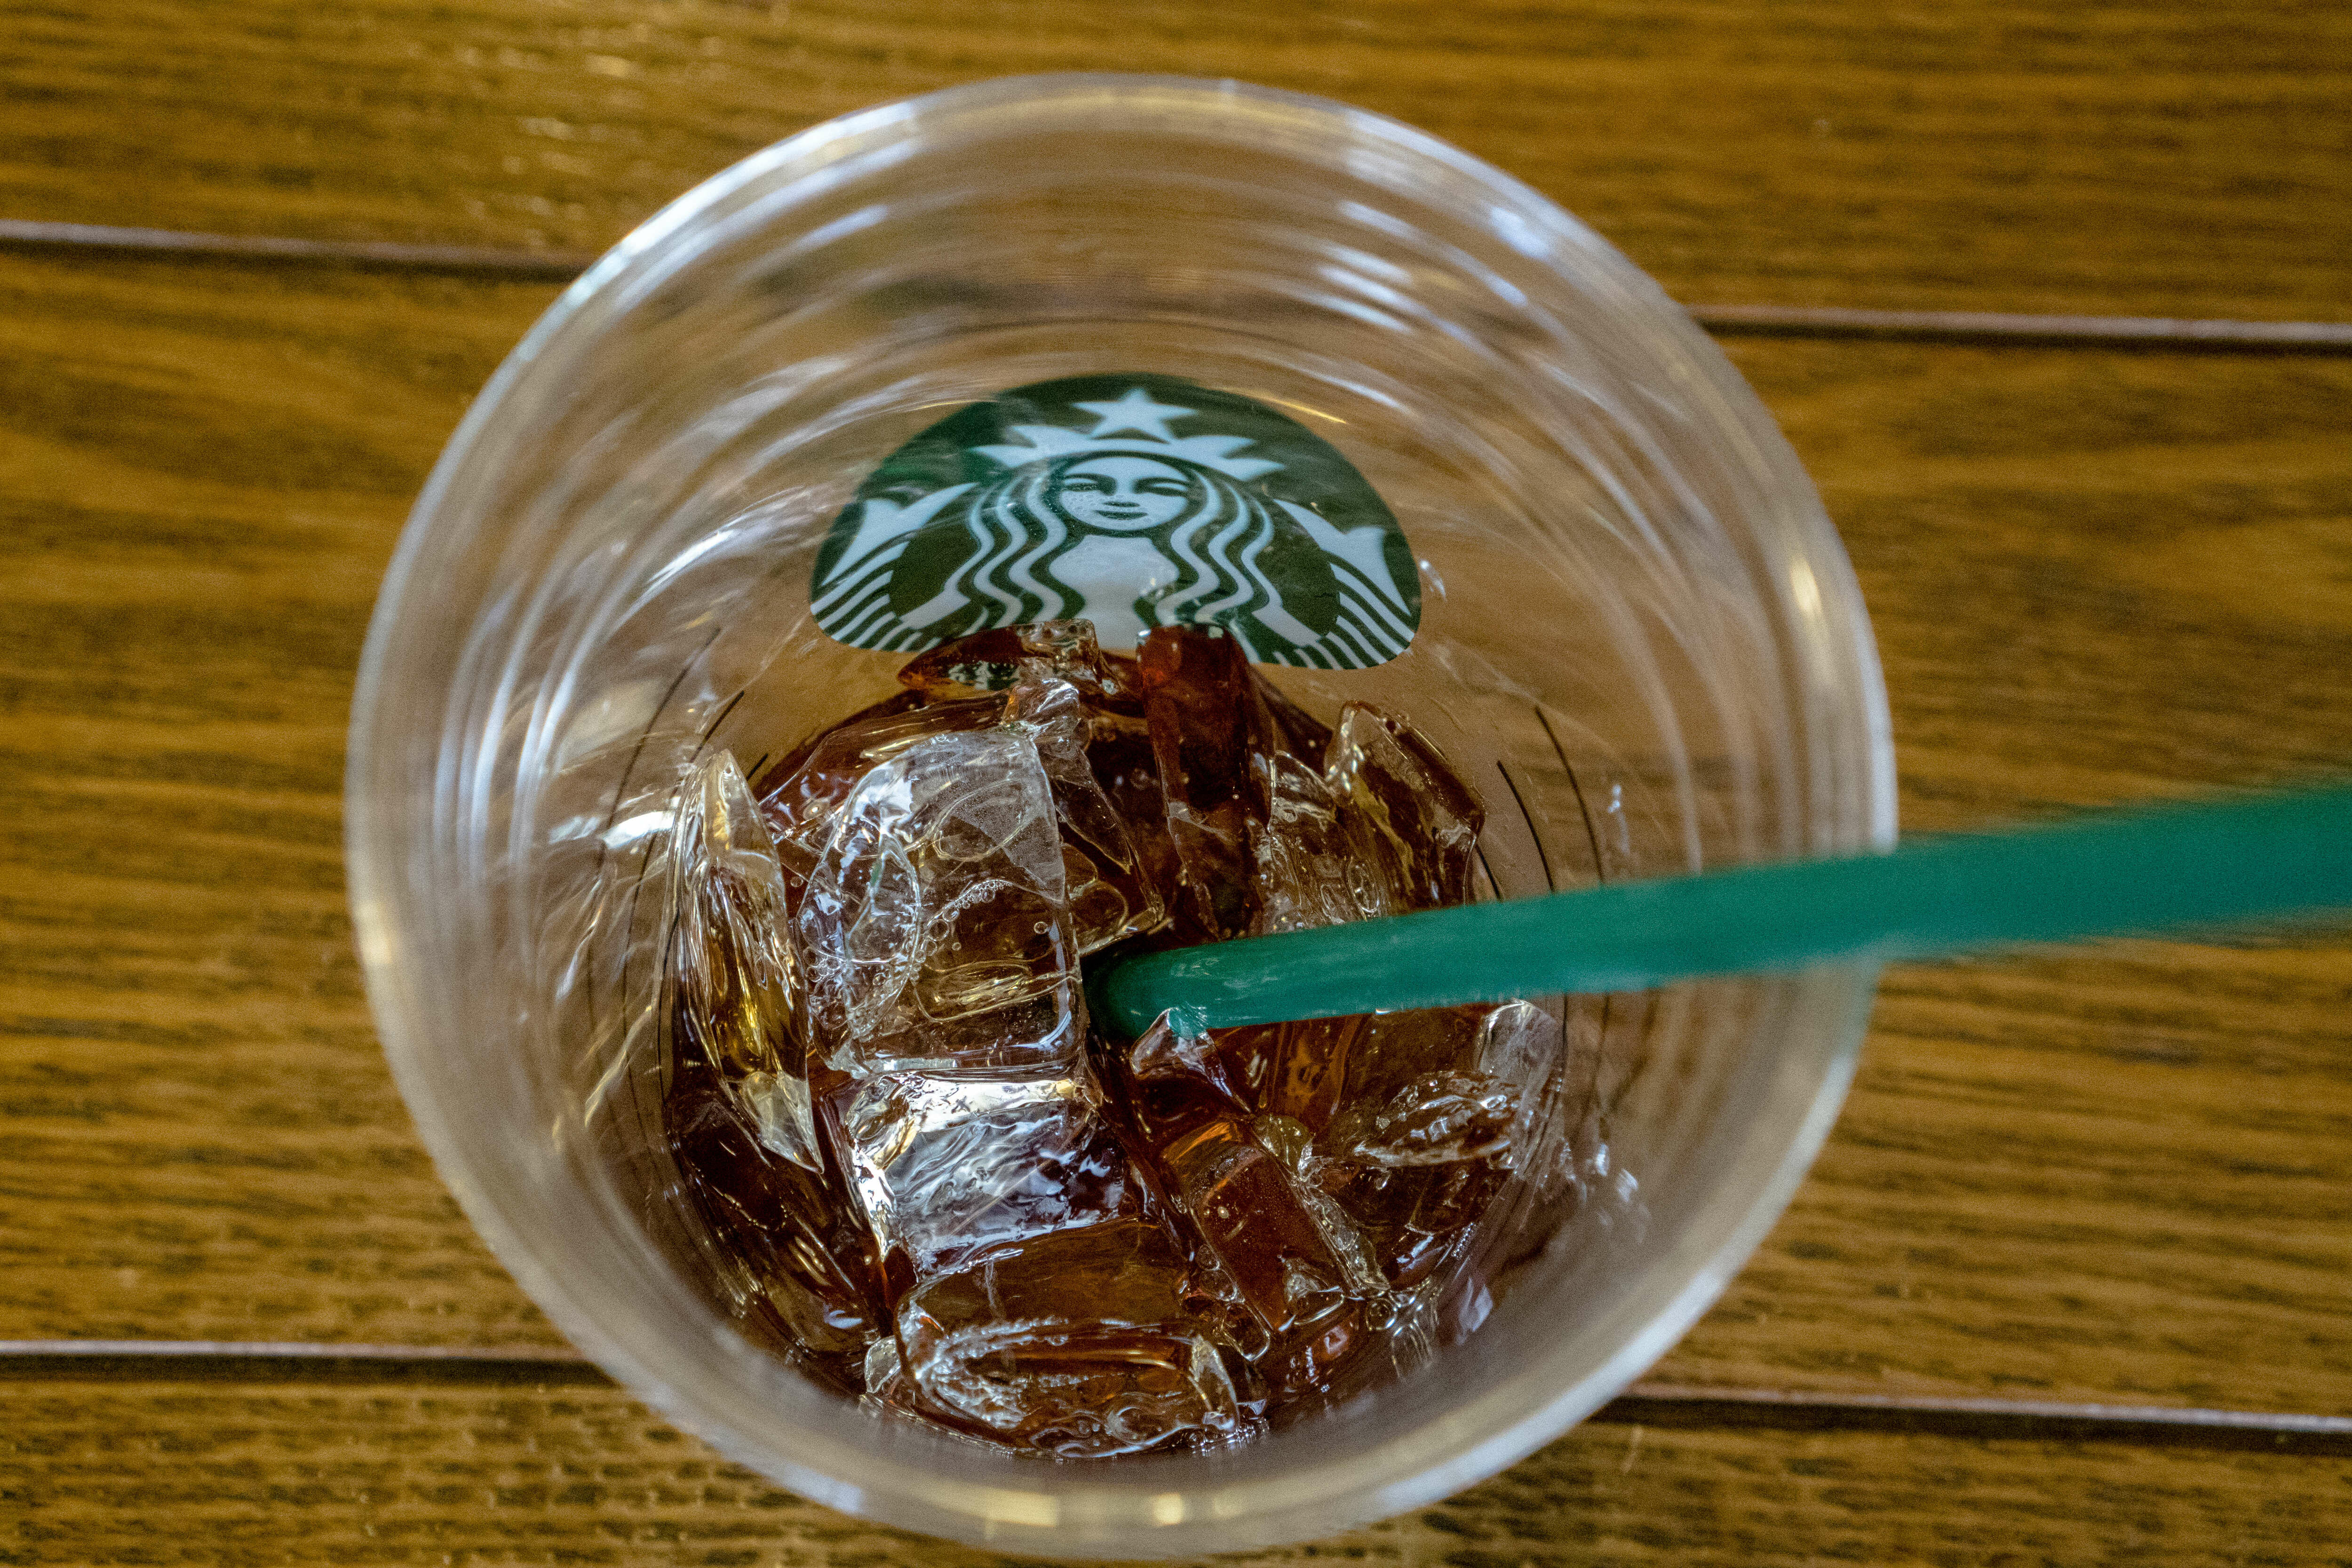 WEIFANG, SHANDONG PROVINCE, CHINA - 2016/08/31: Icy drink in Starbucks coffee shop.  During the third quarter 2016, Starbucks China had $768.2 million in sales, a growth of 17% compared to the prior period. (Photo by Zhang Peng/LightRocket via Getty Images)